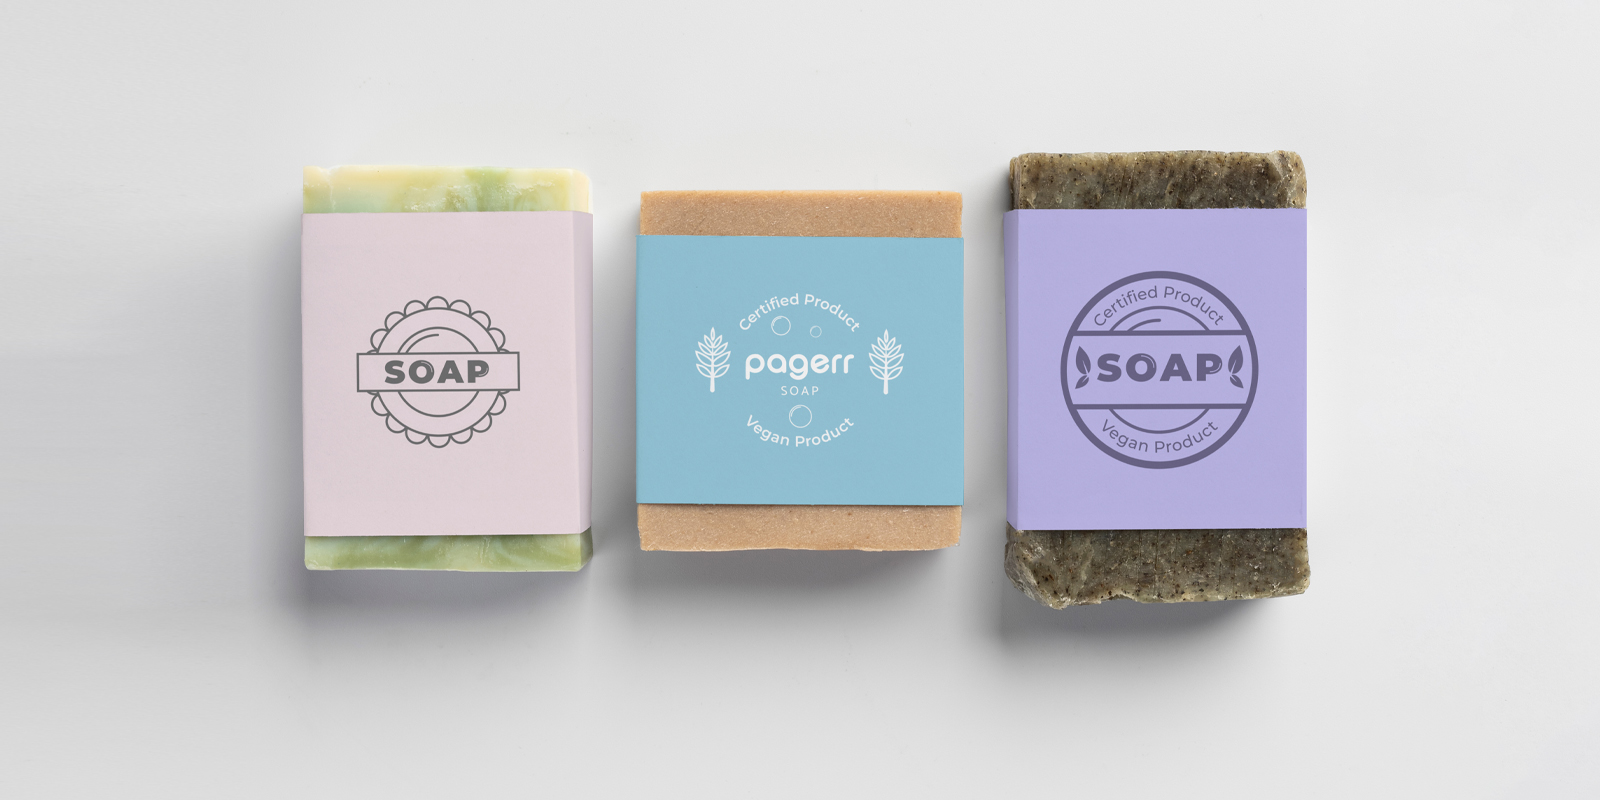 Soap labels in Perth - Print with Pagerr